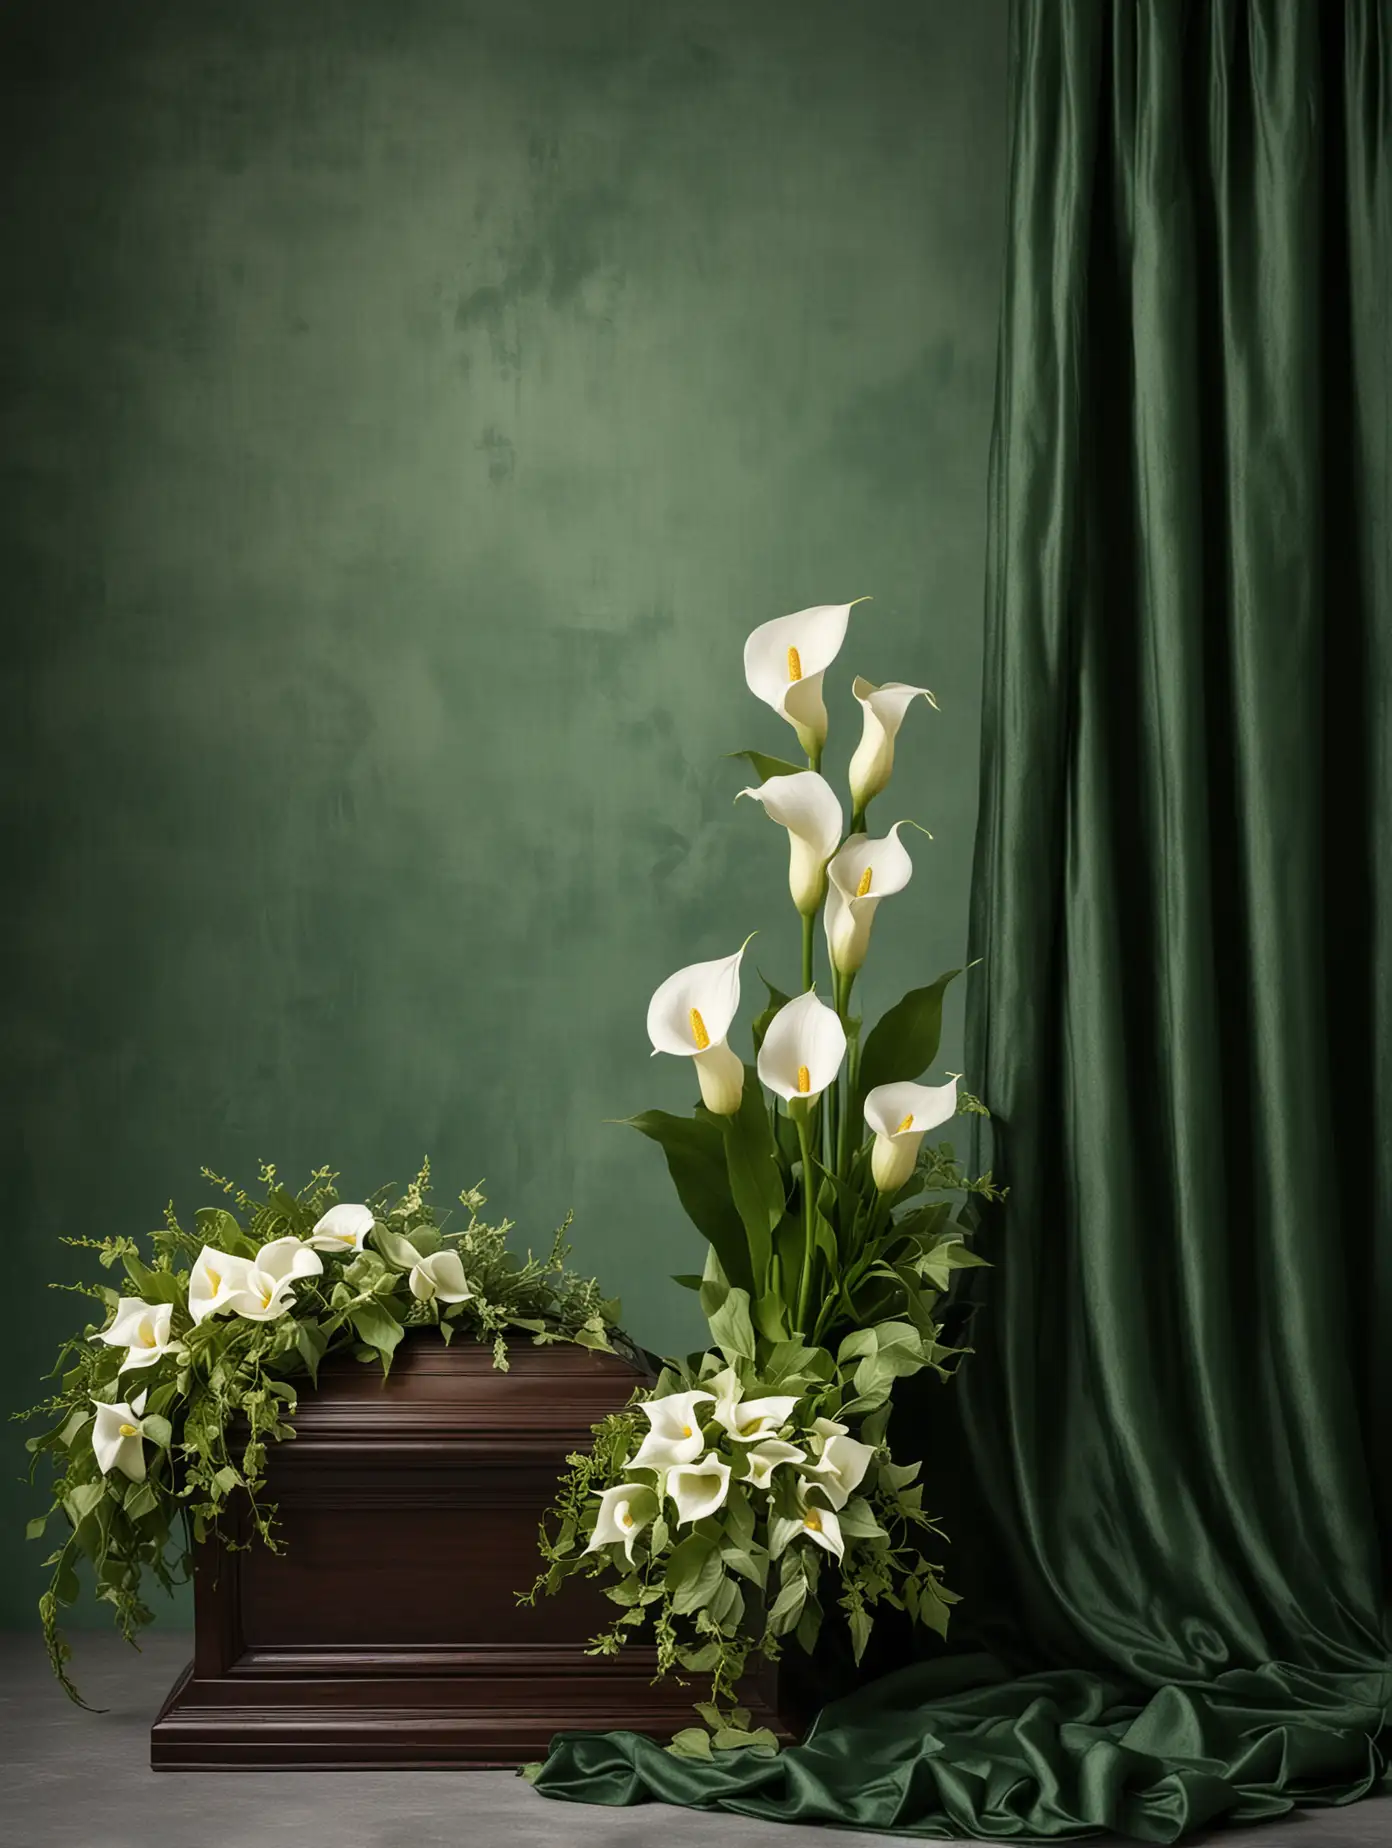 Elegant Funeral Decoration with Calla Lily Bouquet and Draped Green Fabric